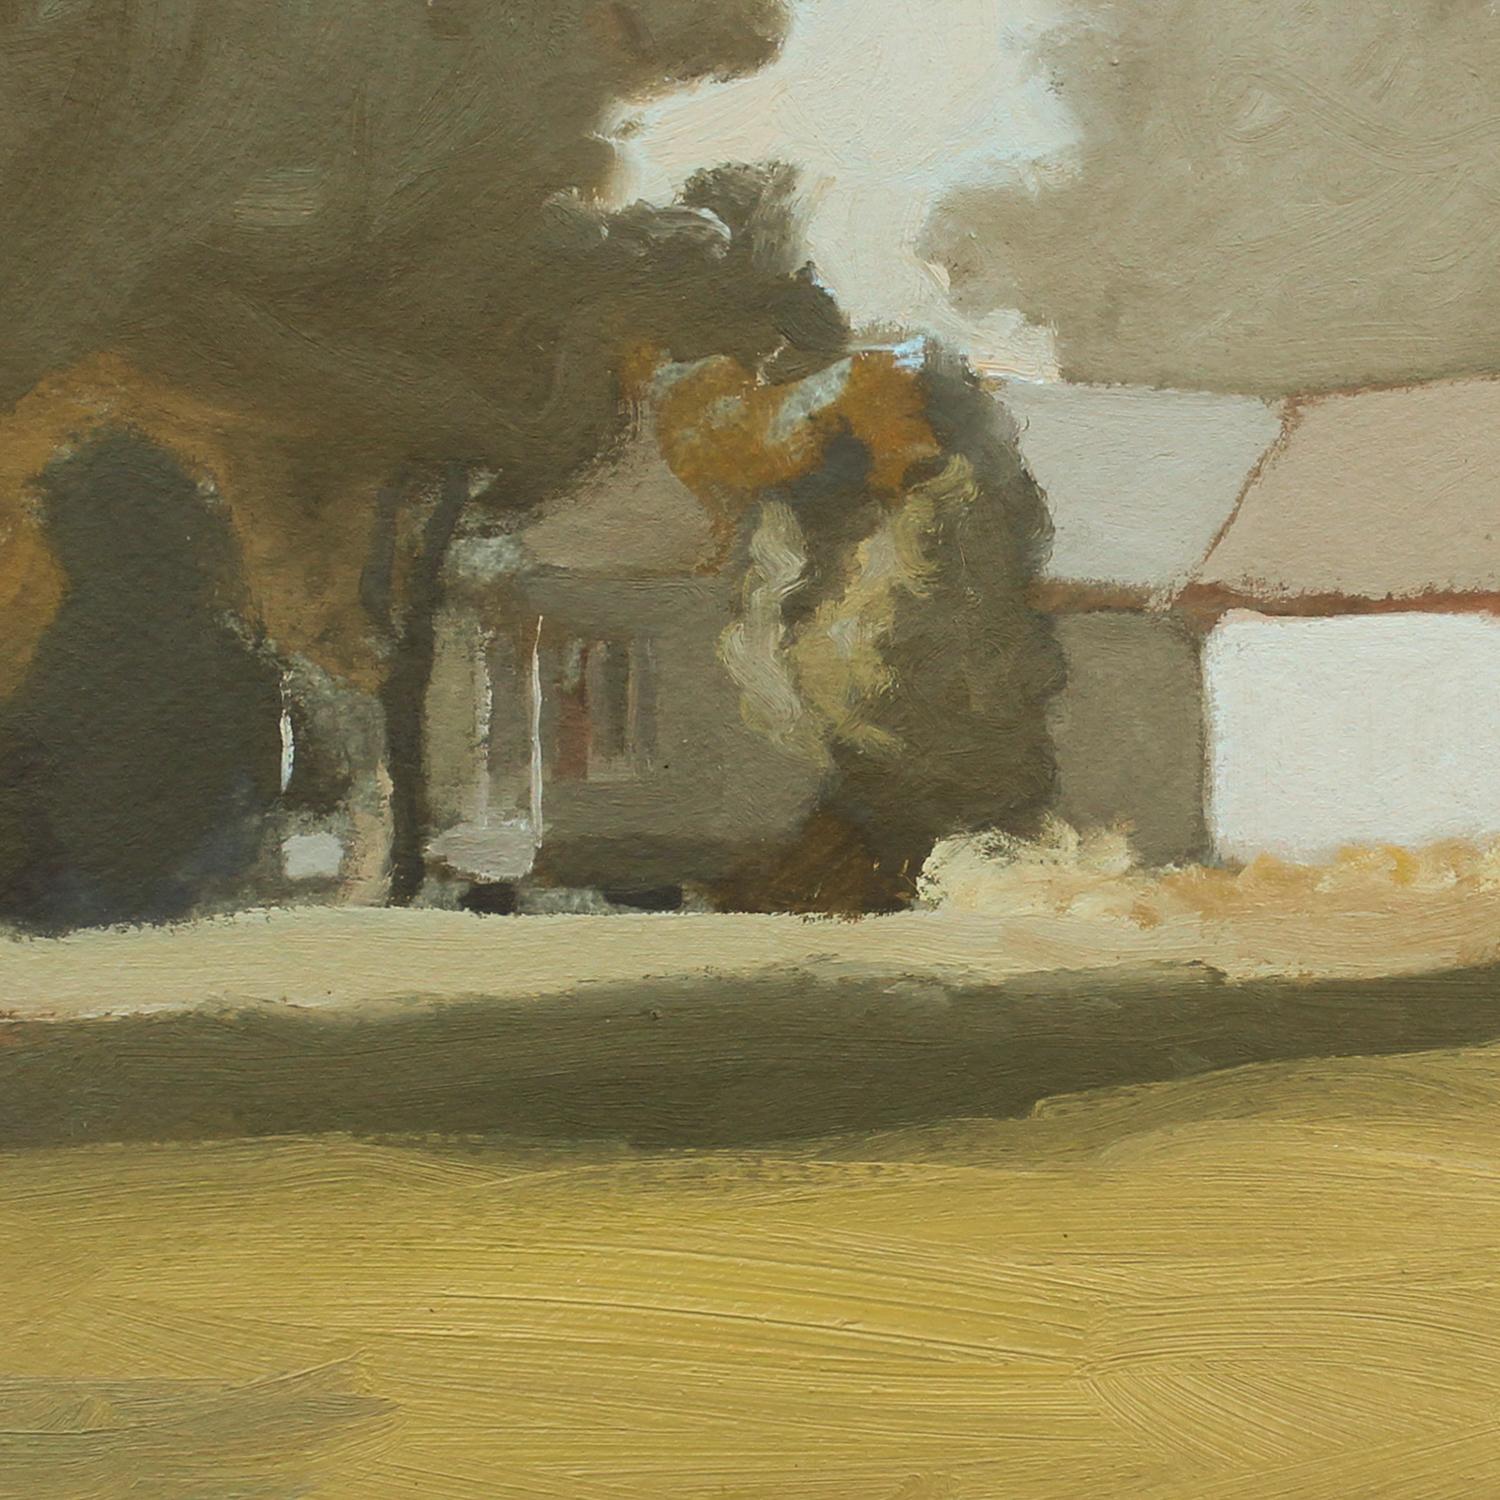 'Inglewood 6-15-2020' - plein air landscape - architectural painting  - Painting by Kathryn Keller